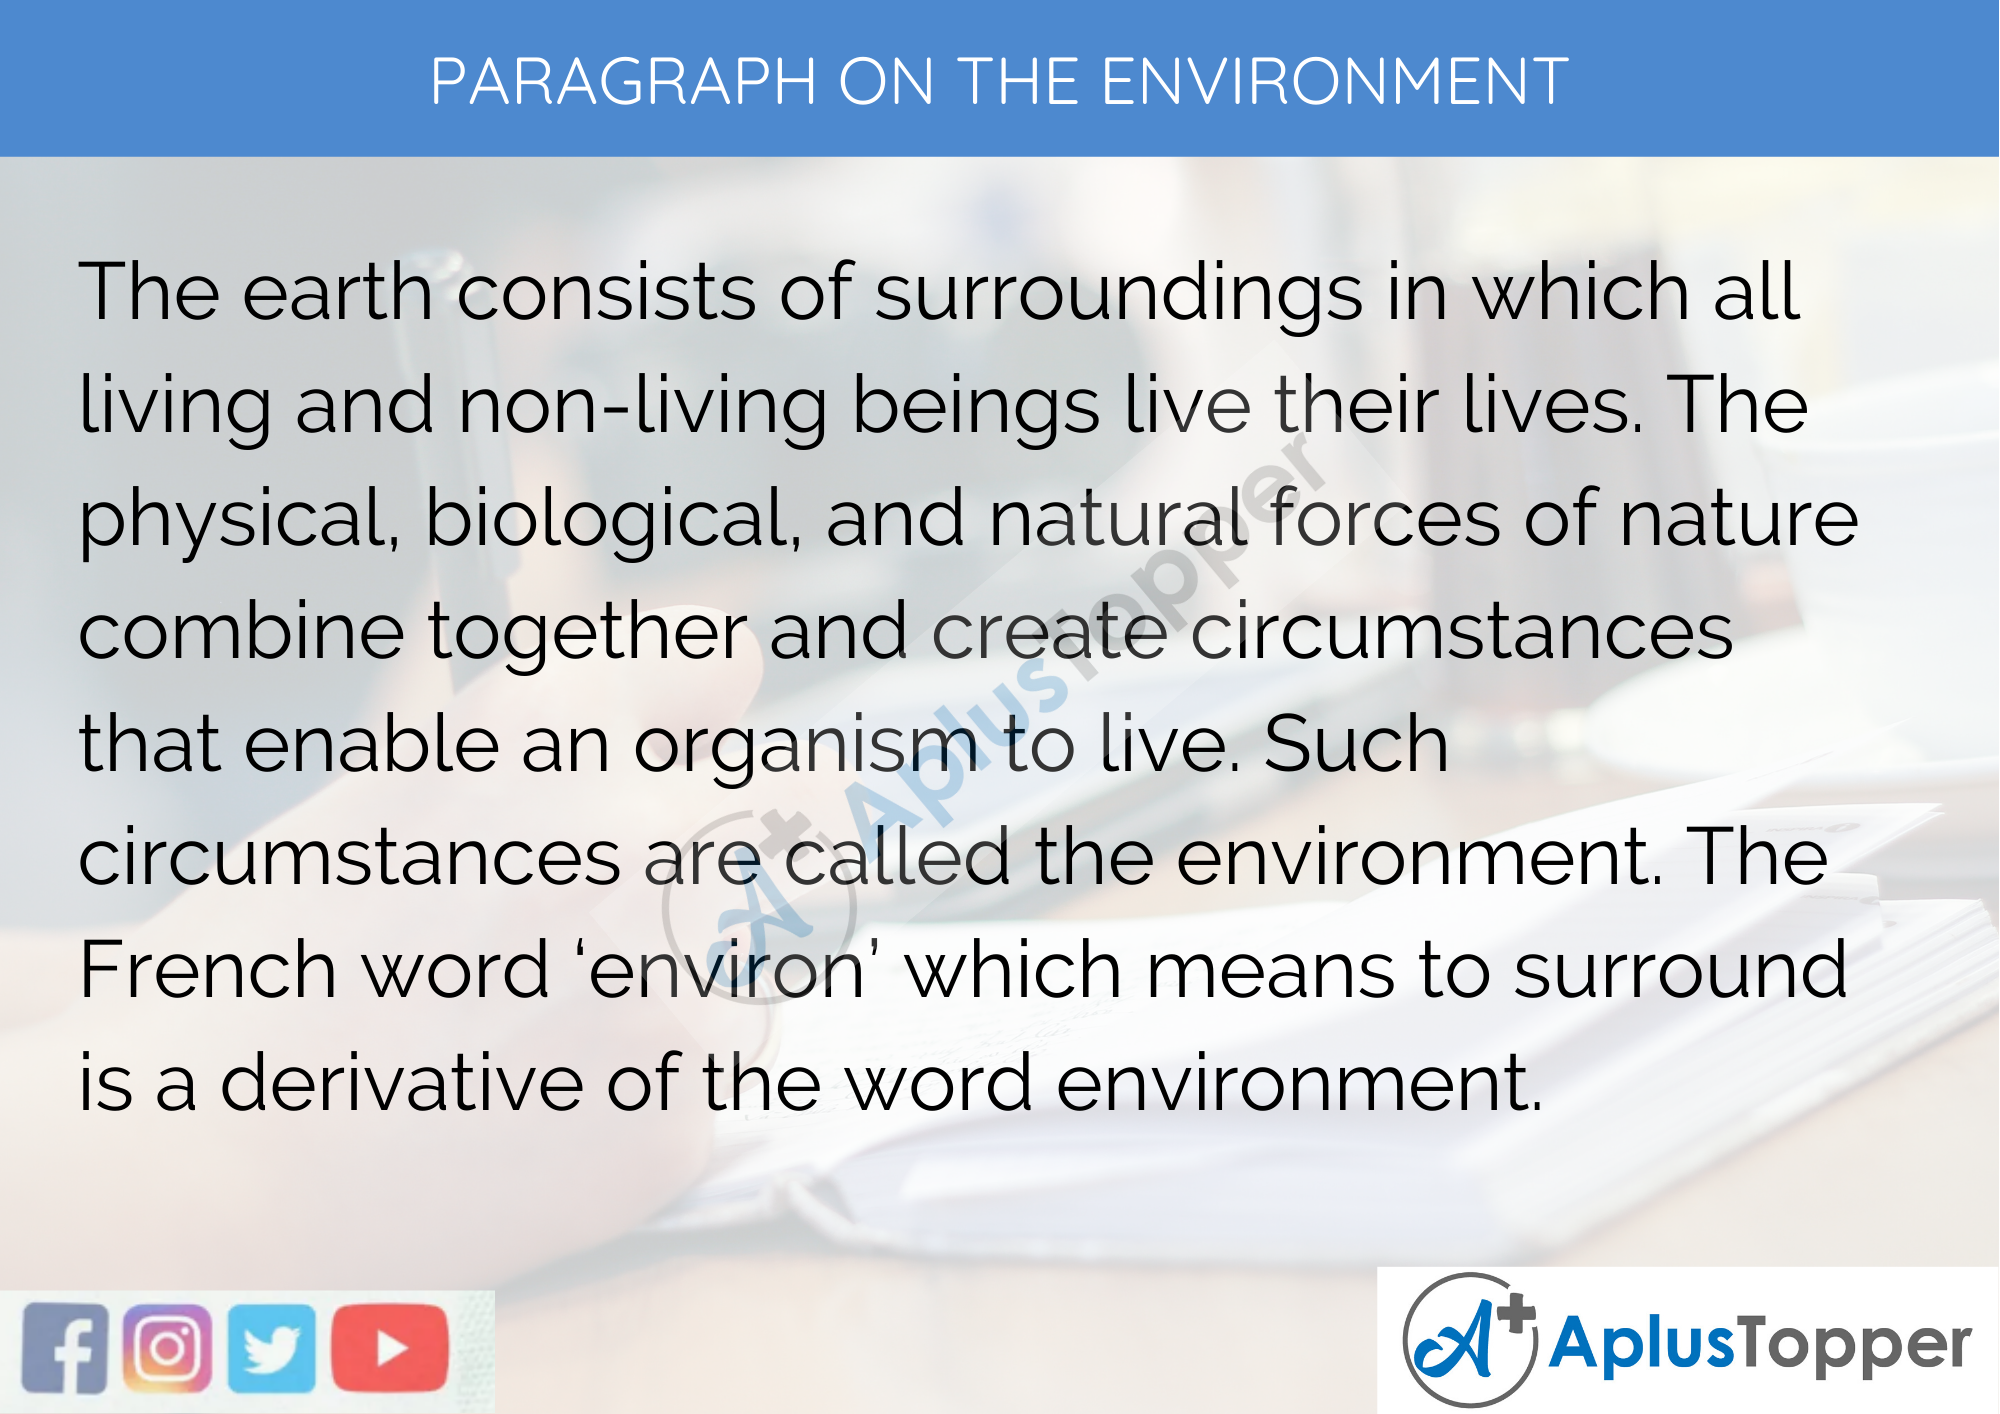 Paragraph on the Environment 